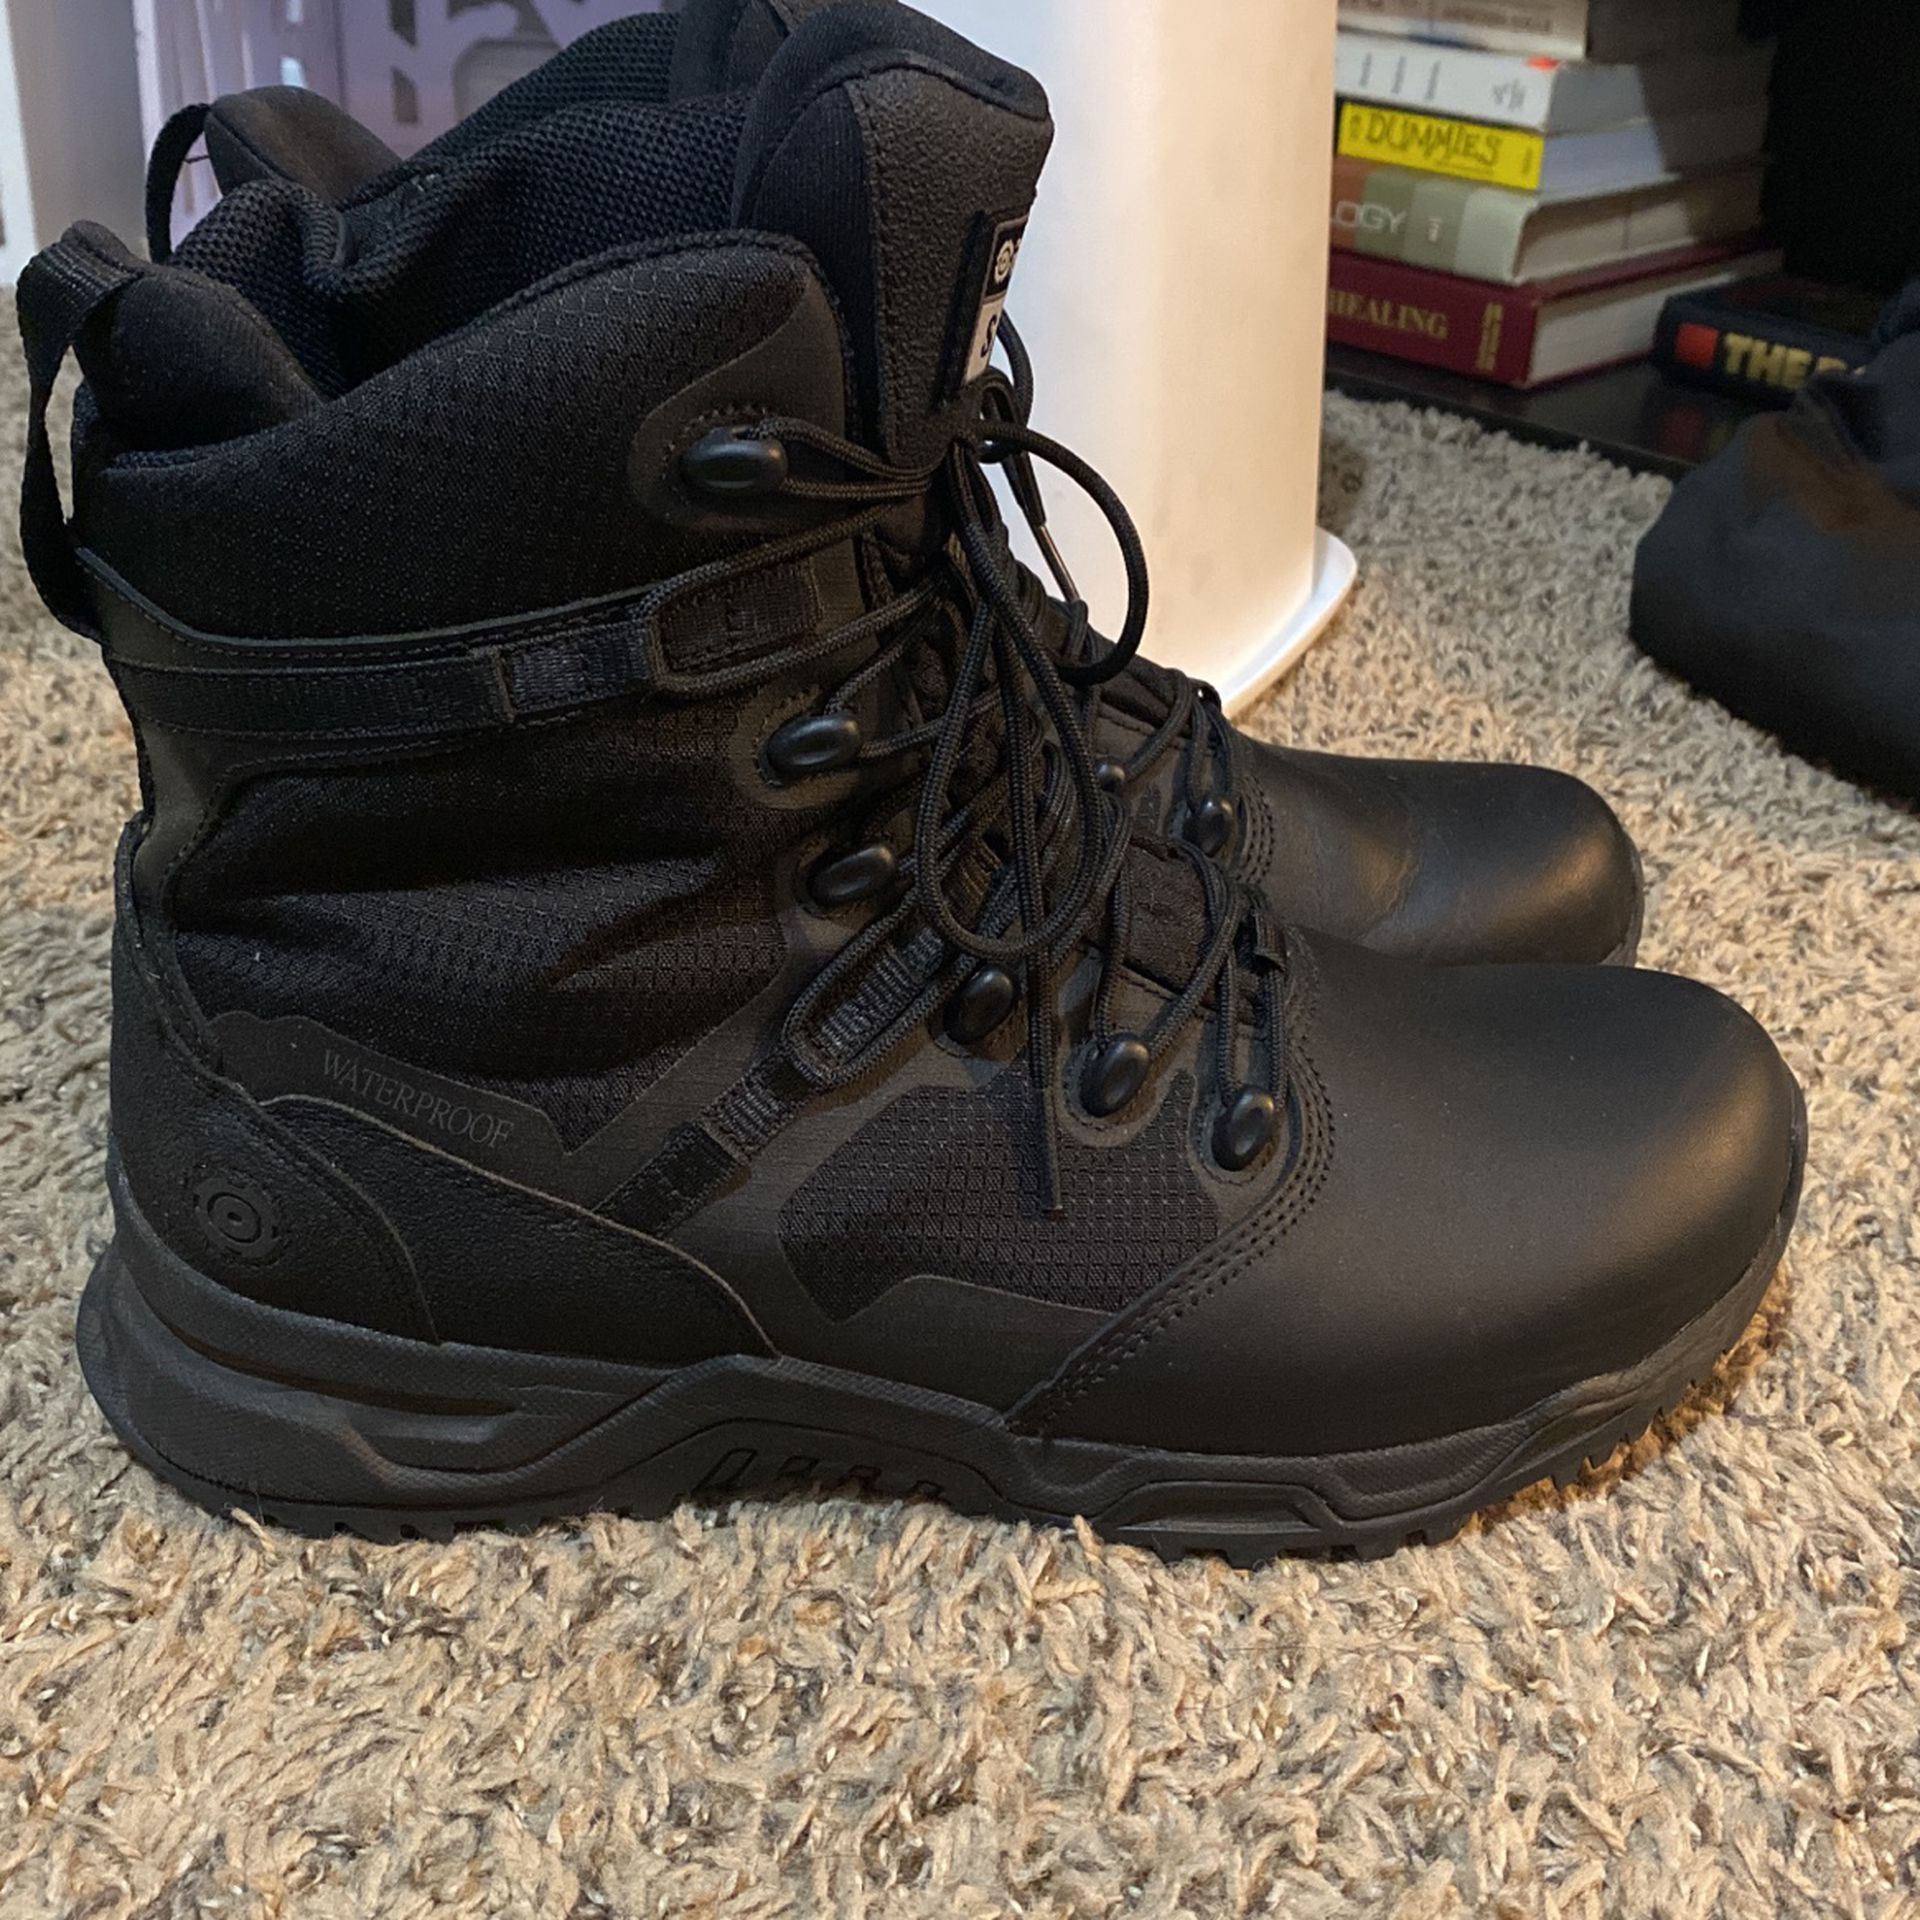 Boots 10.5 